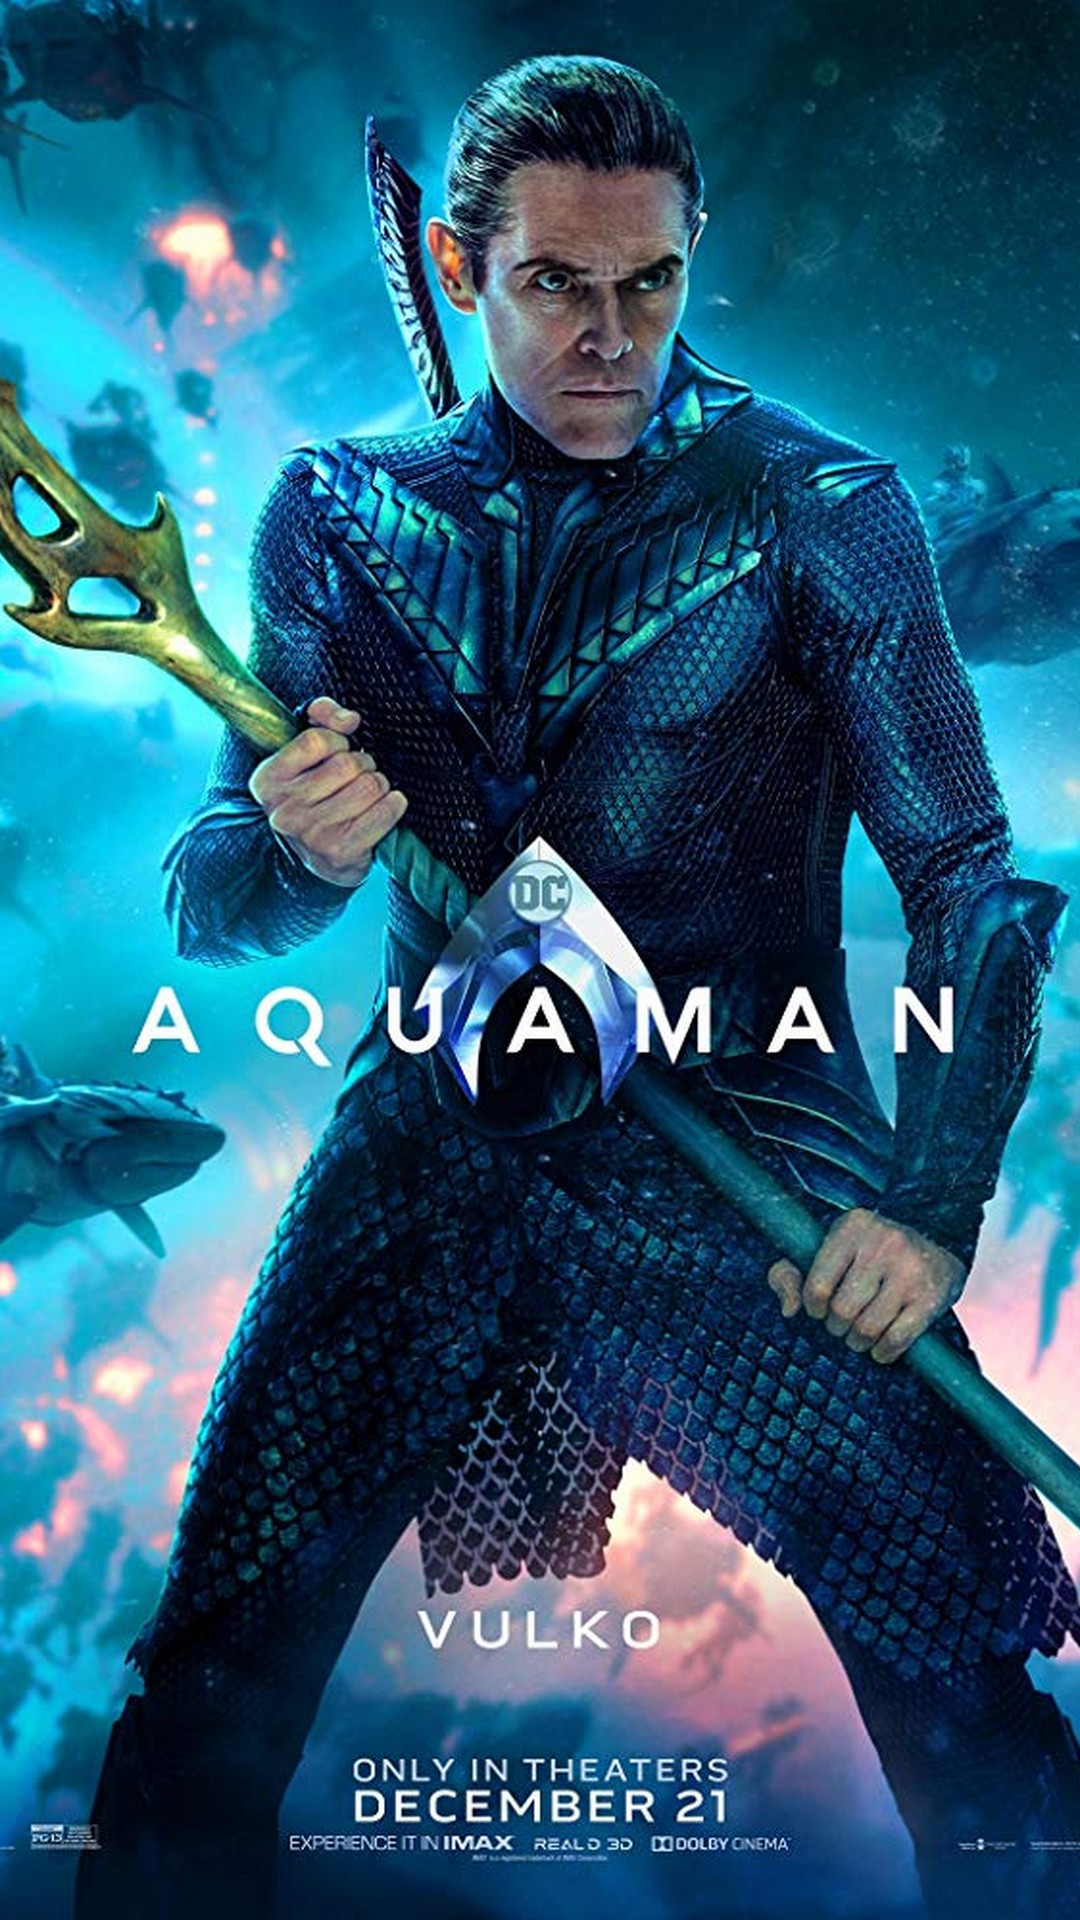 Aquaman iPhone Wallpaper with image resolution 1080x1920 pixel. You can make this wallpaper for your iPhone 5, 6, 7, 8, X backgrounds, Mobile Screensaver, or iPad Lock Screen